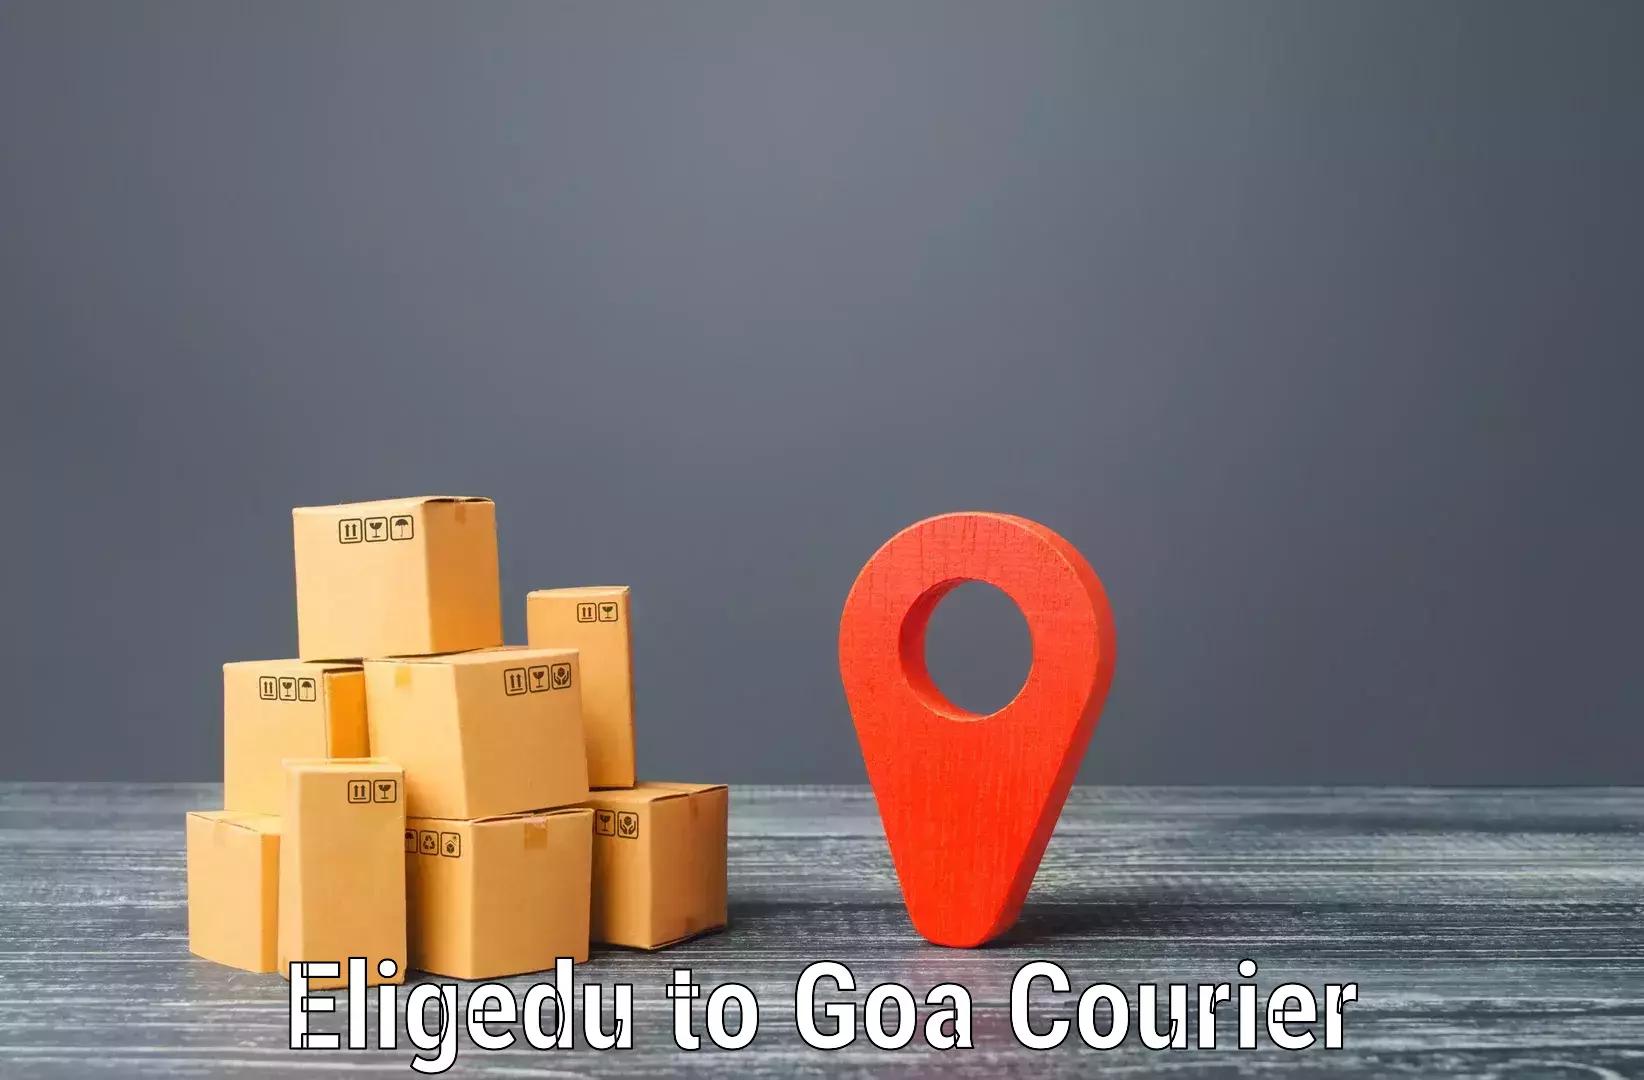 Express courier capabilities Eligedu to South Goa